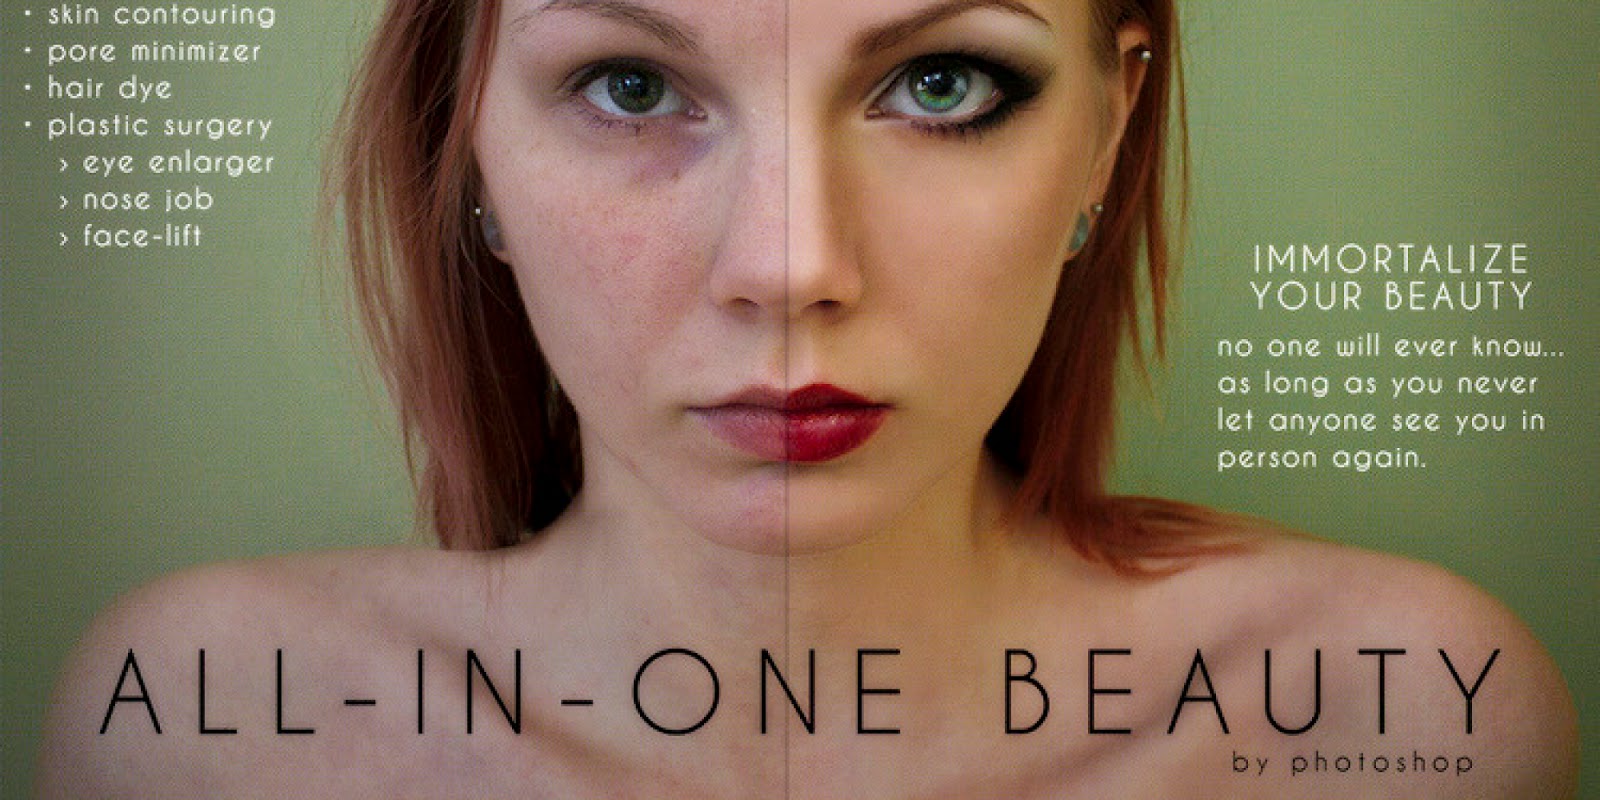 We are beautiful ones. Job face. Deceiving ads. Salish matter Photoshop.